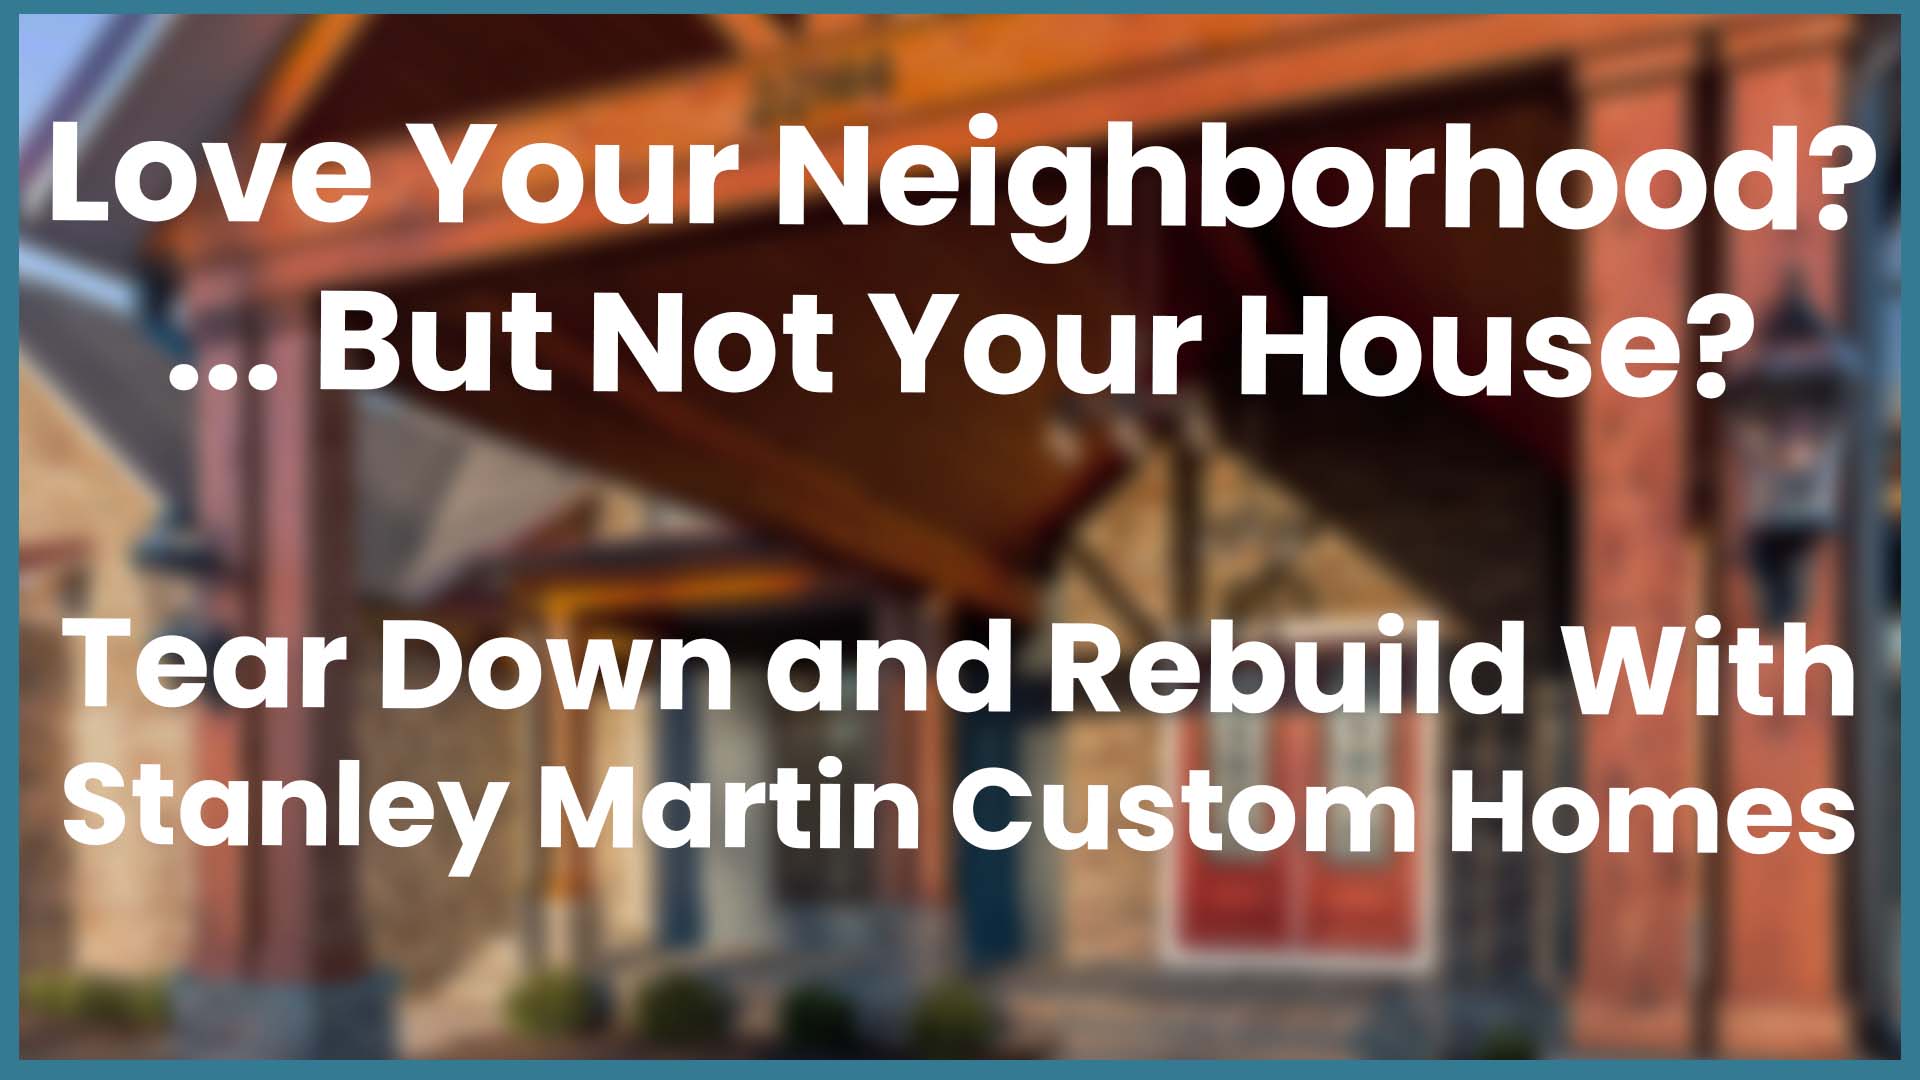 Love Your Neighborhood? But Not Your House?